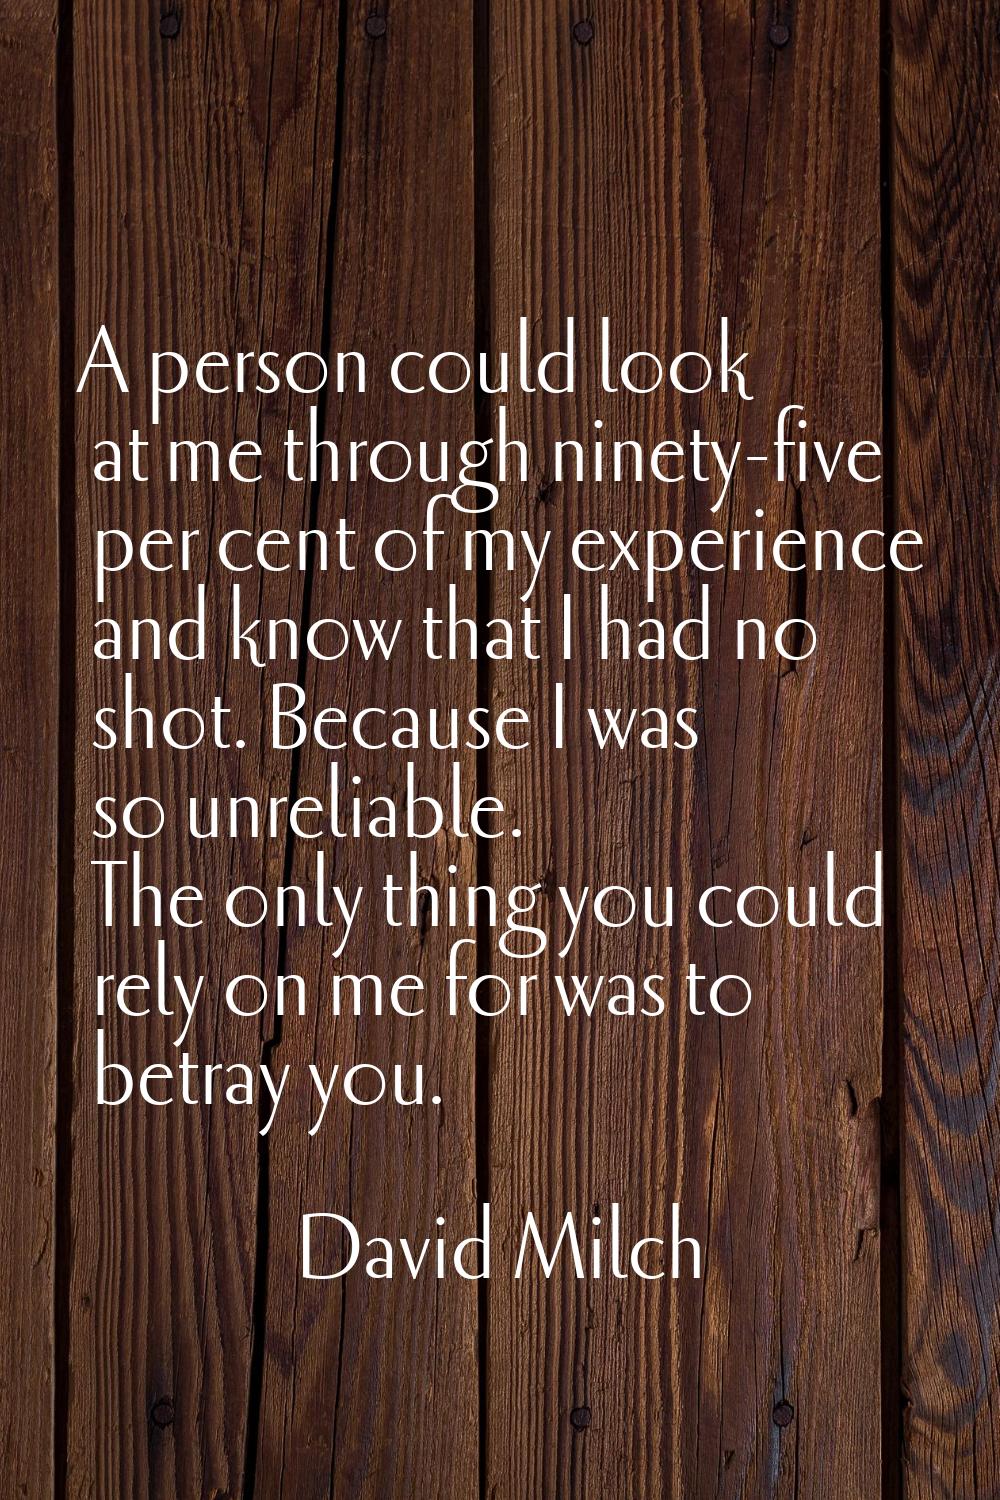 A person could look at me through ninety-five per cent of my experience and know that I had no shot